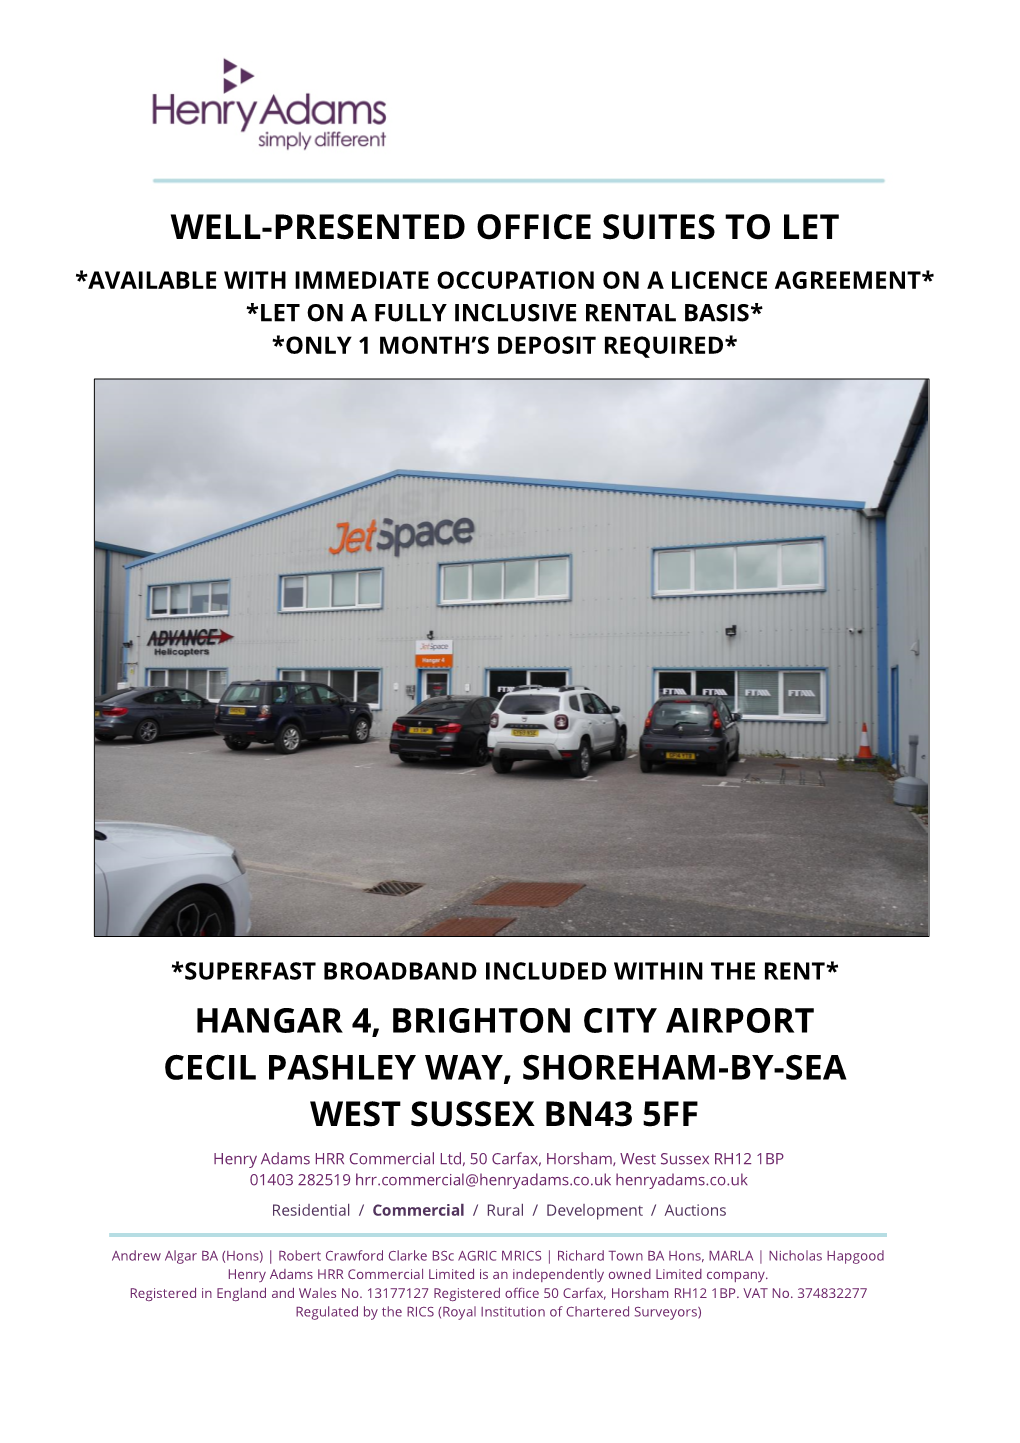 Well-Presented Office Suites to Let Hangar 4, Brighton City Airport Cecil Pashley Way, Shoreham-By-Sea West Sussex Bn43